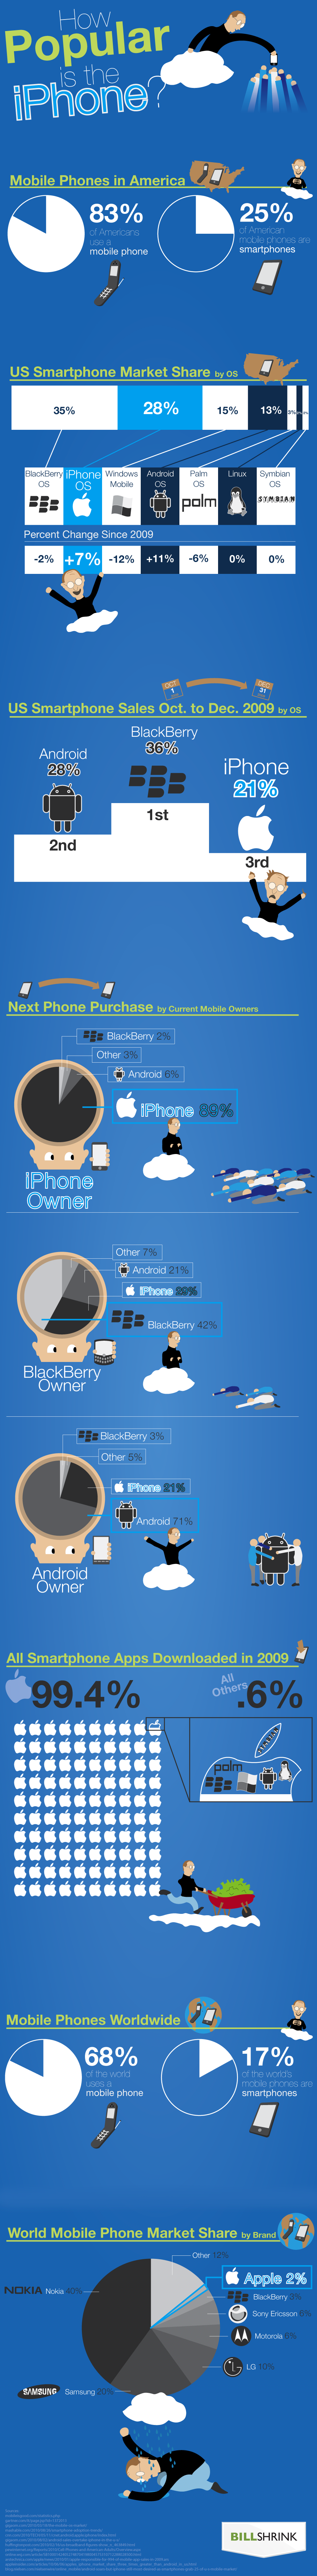 How Popular is the iPhone? [InfoGraphic]